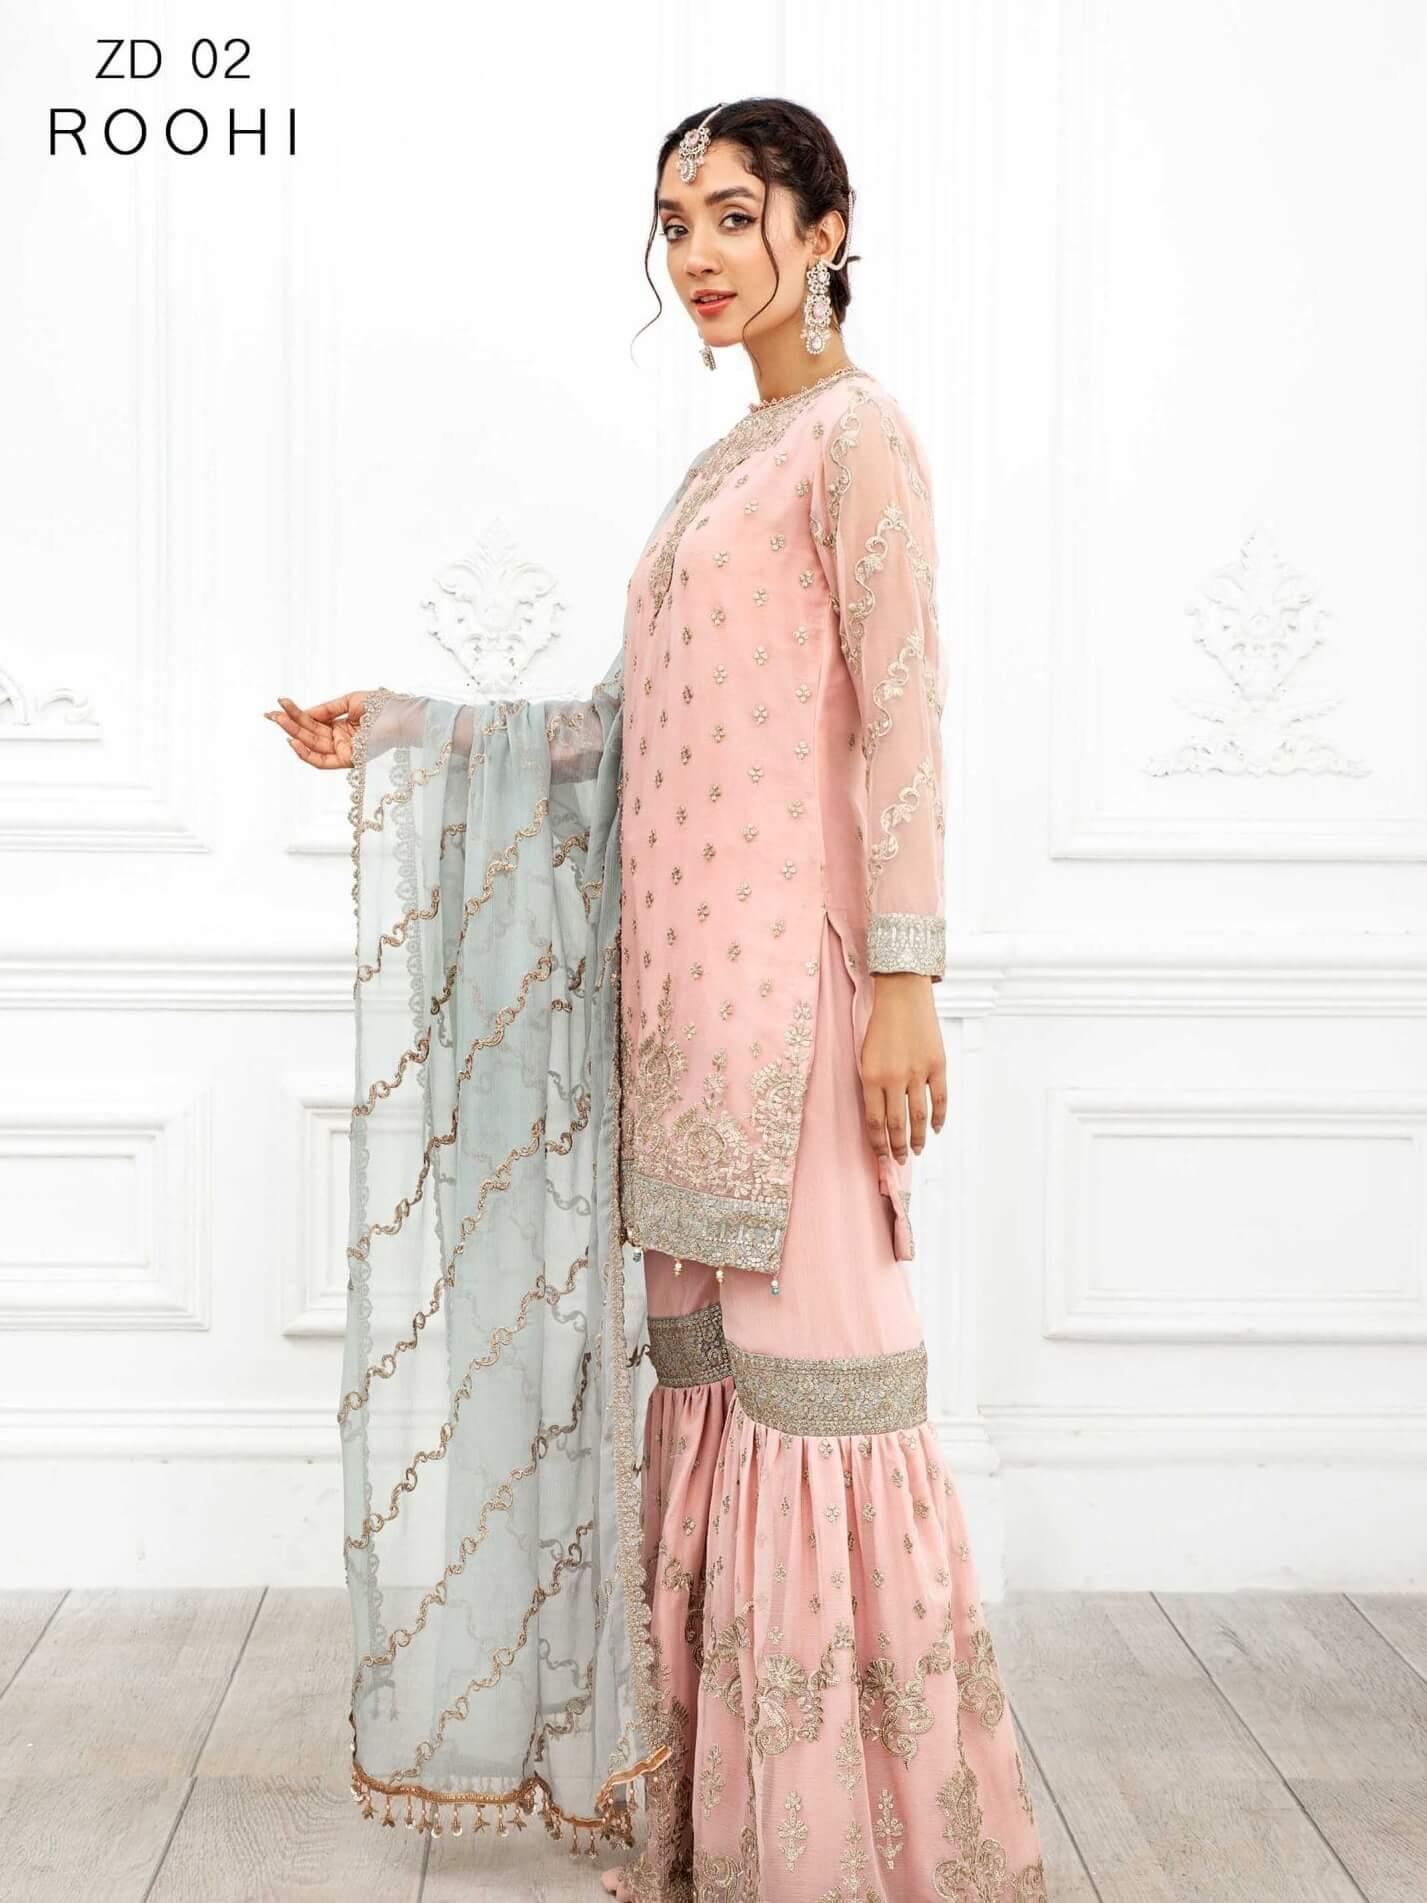 Roohi-chiffon gharara suit 3pc -Unstitched.